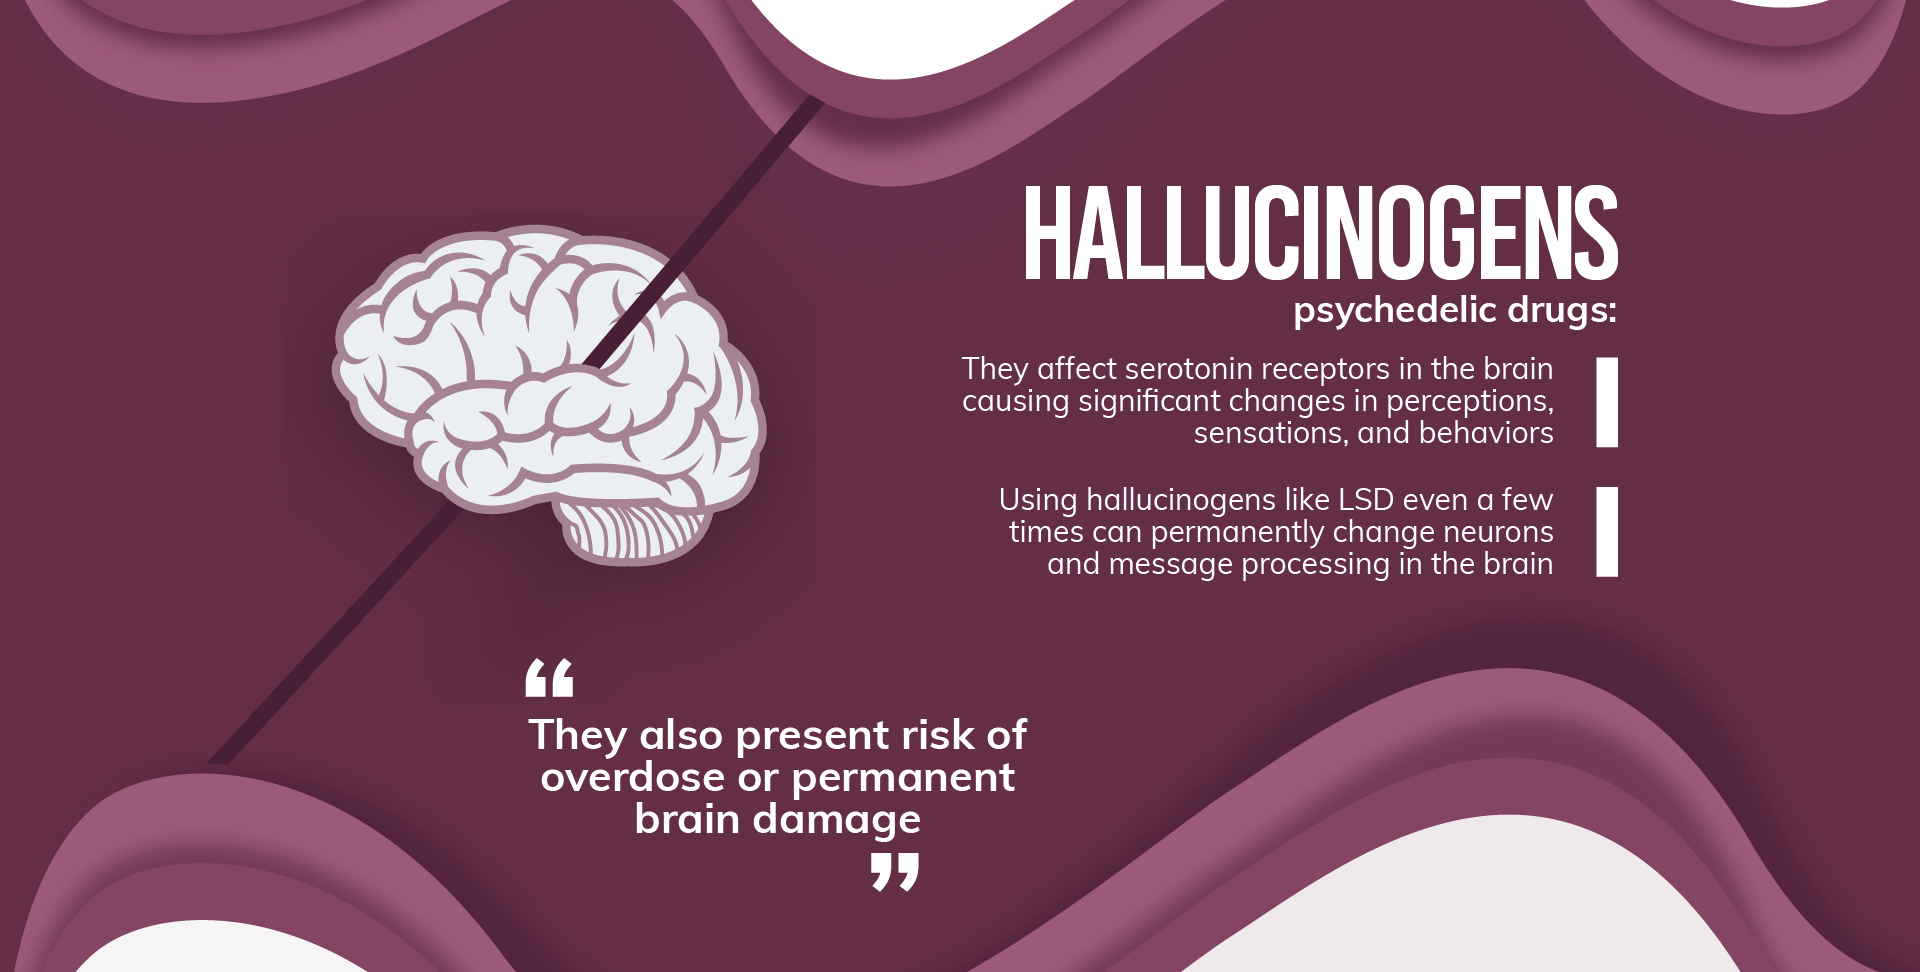 Hallucinogens are psychedelic drugs, they affect serotonin receptors in the brain causing significant changes in perceptions, sensations and behaviors, using hallucinogens like LSD even a few times can permanently change neurons and message processing in the brain, hallucinogens also present risk of overdose or permanent brain damage0